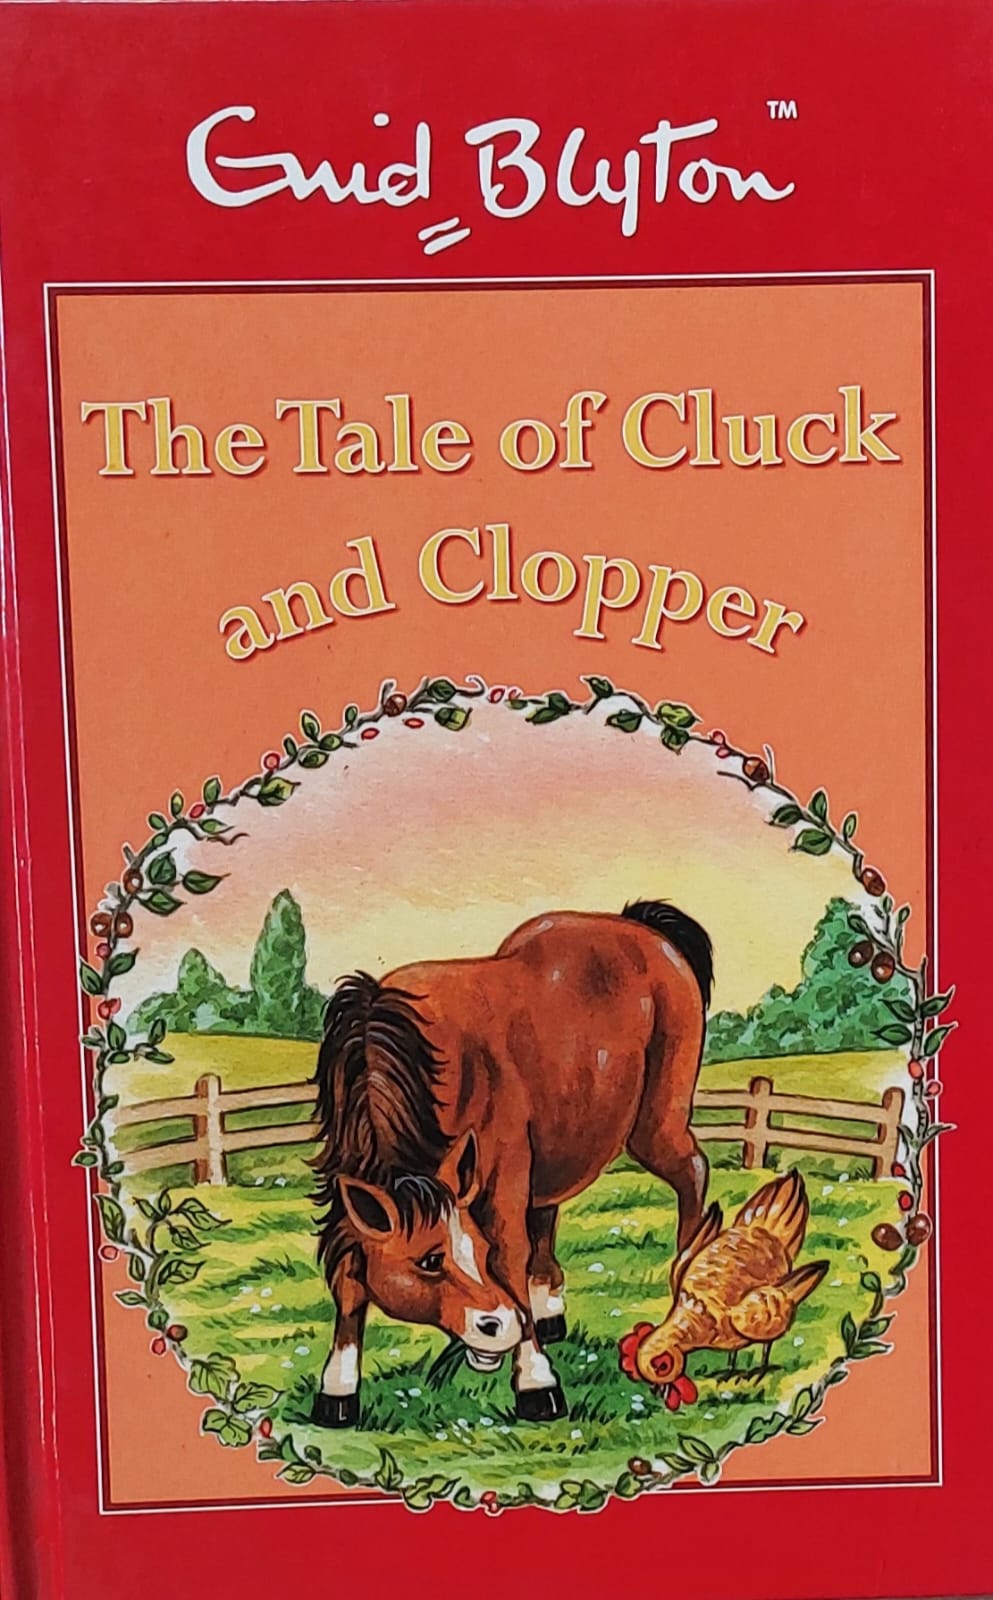 IMG : The tale of Cluck and Clopper